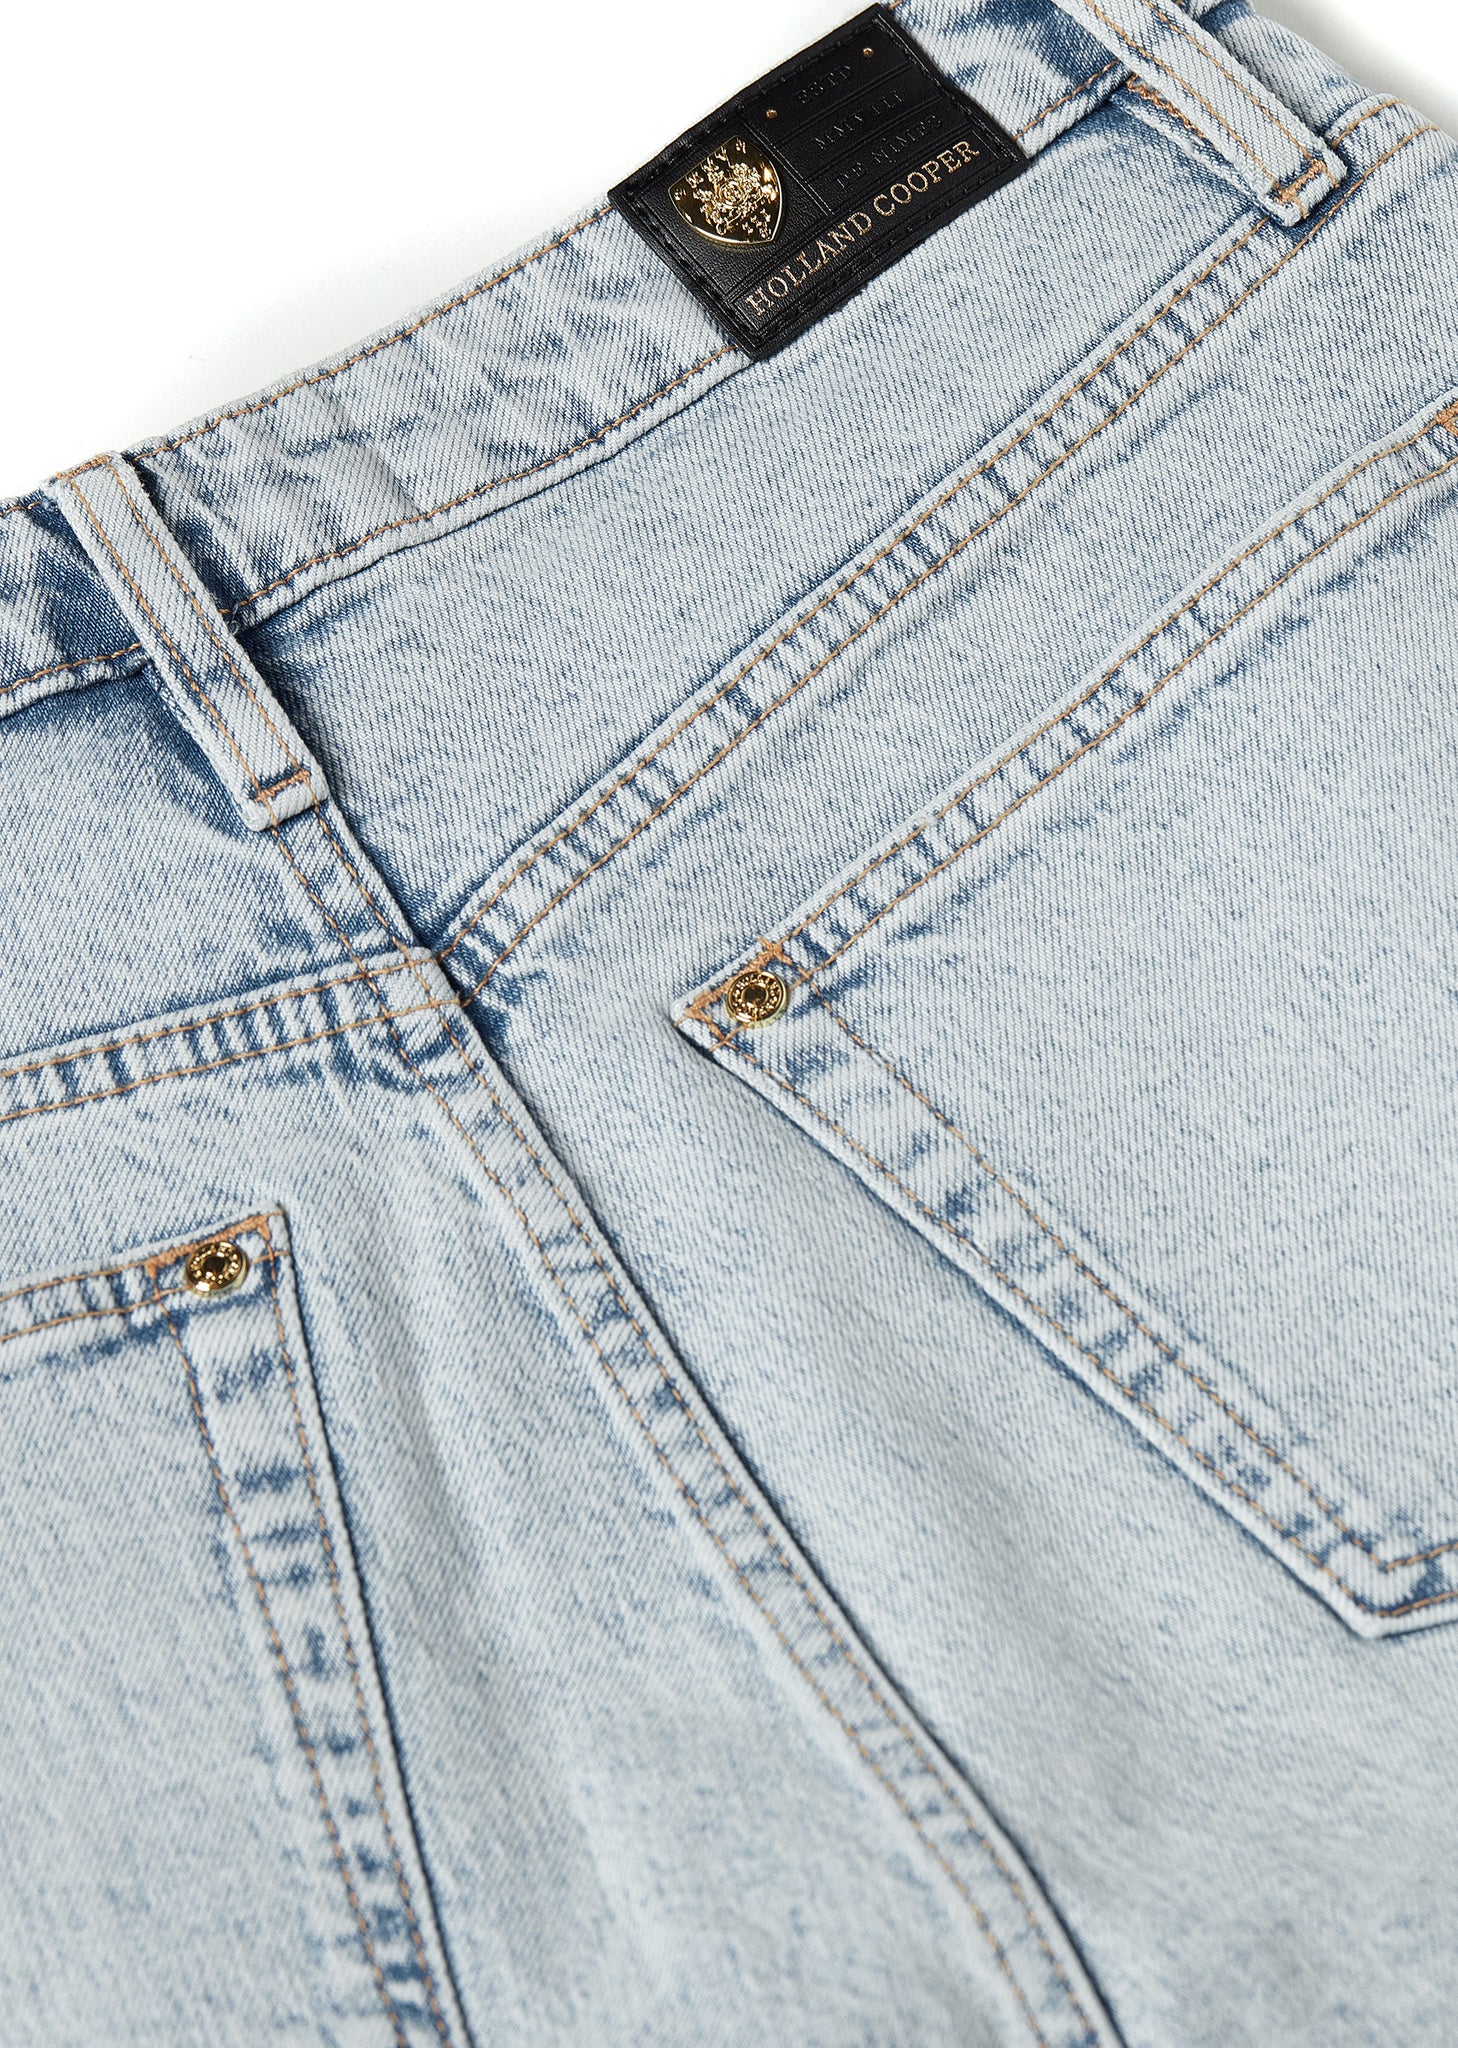 back pocket detail on womens high rise light blue denim slim fit jean with raw hem and two open pockets on the front and back with gold stirrup charm to the belt loop